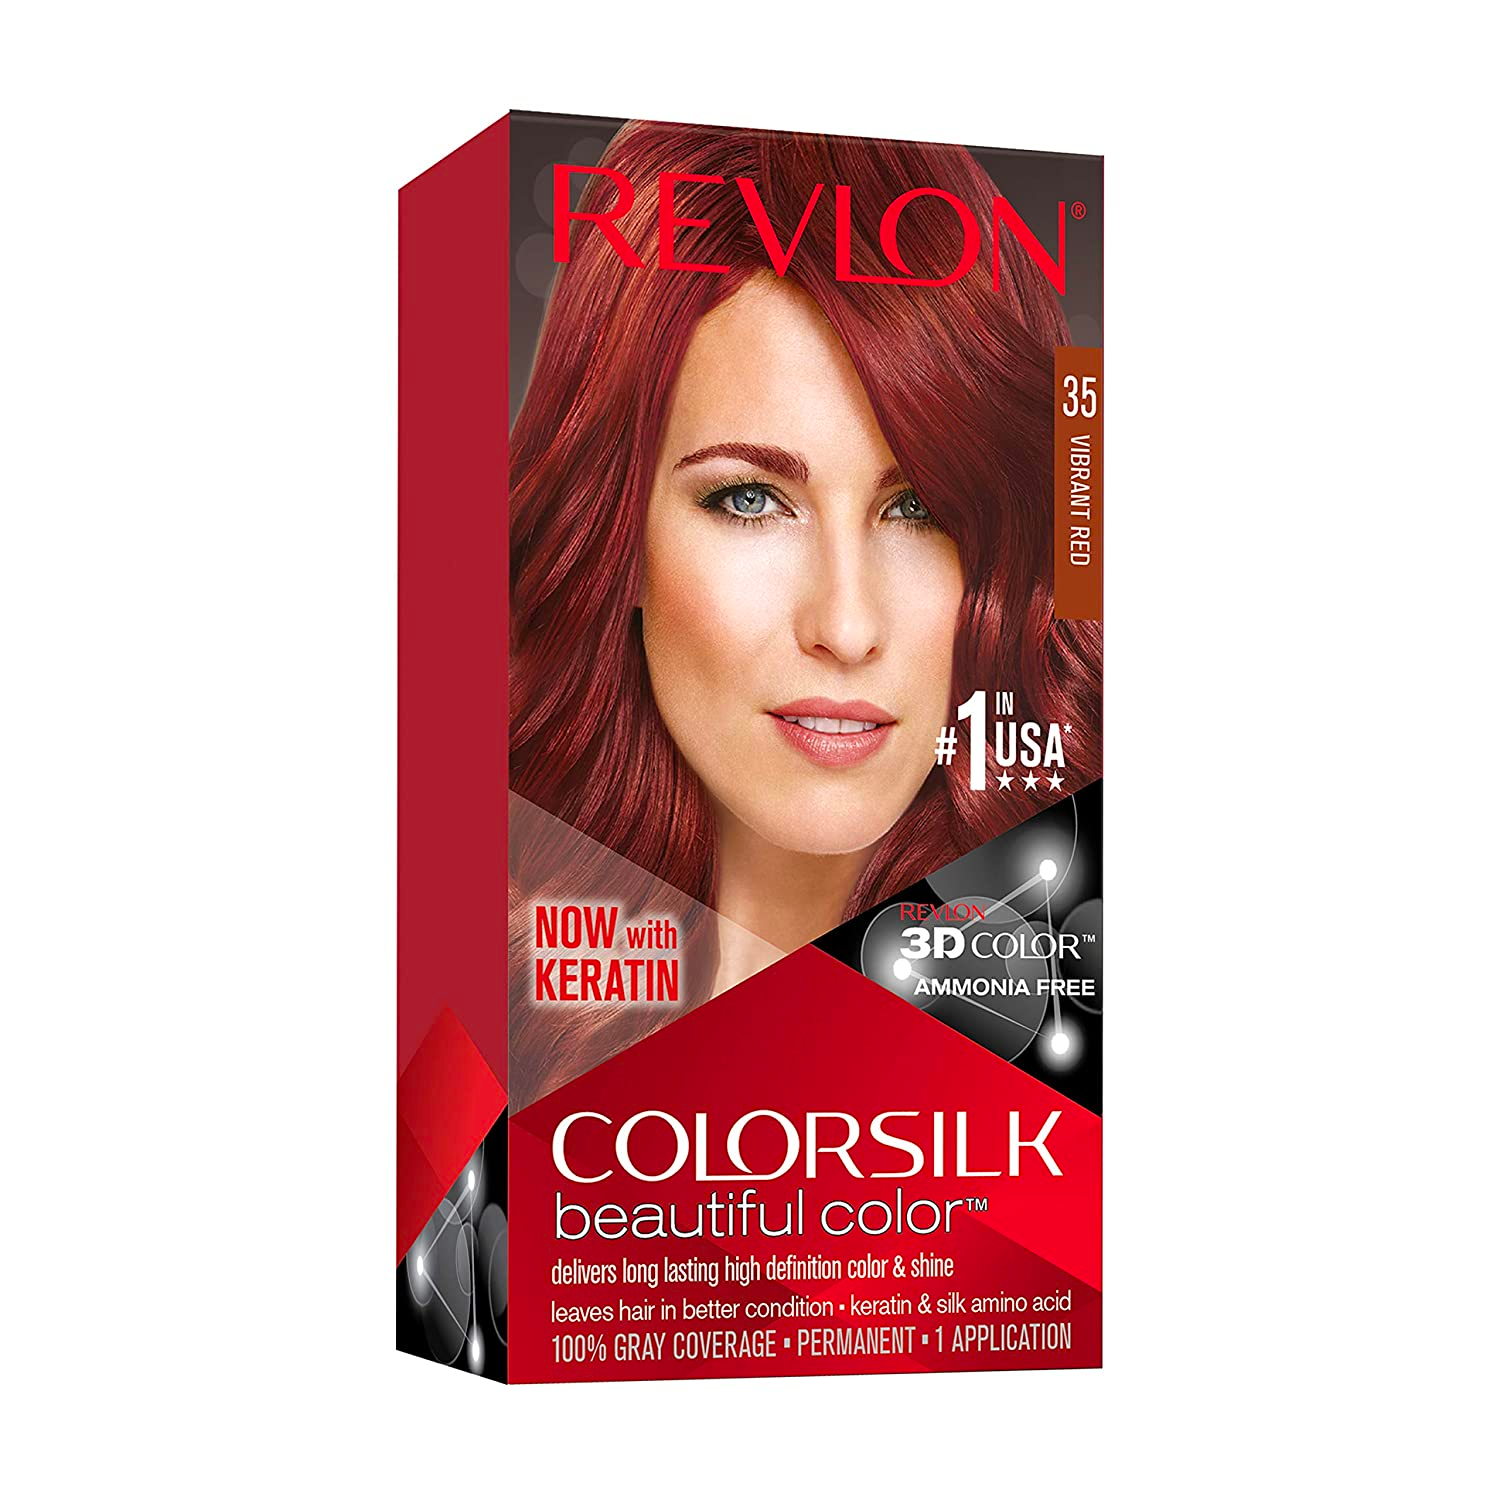 Top 100 image best home color for hair - Thptnganamst.edu.vn